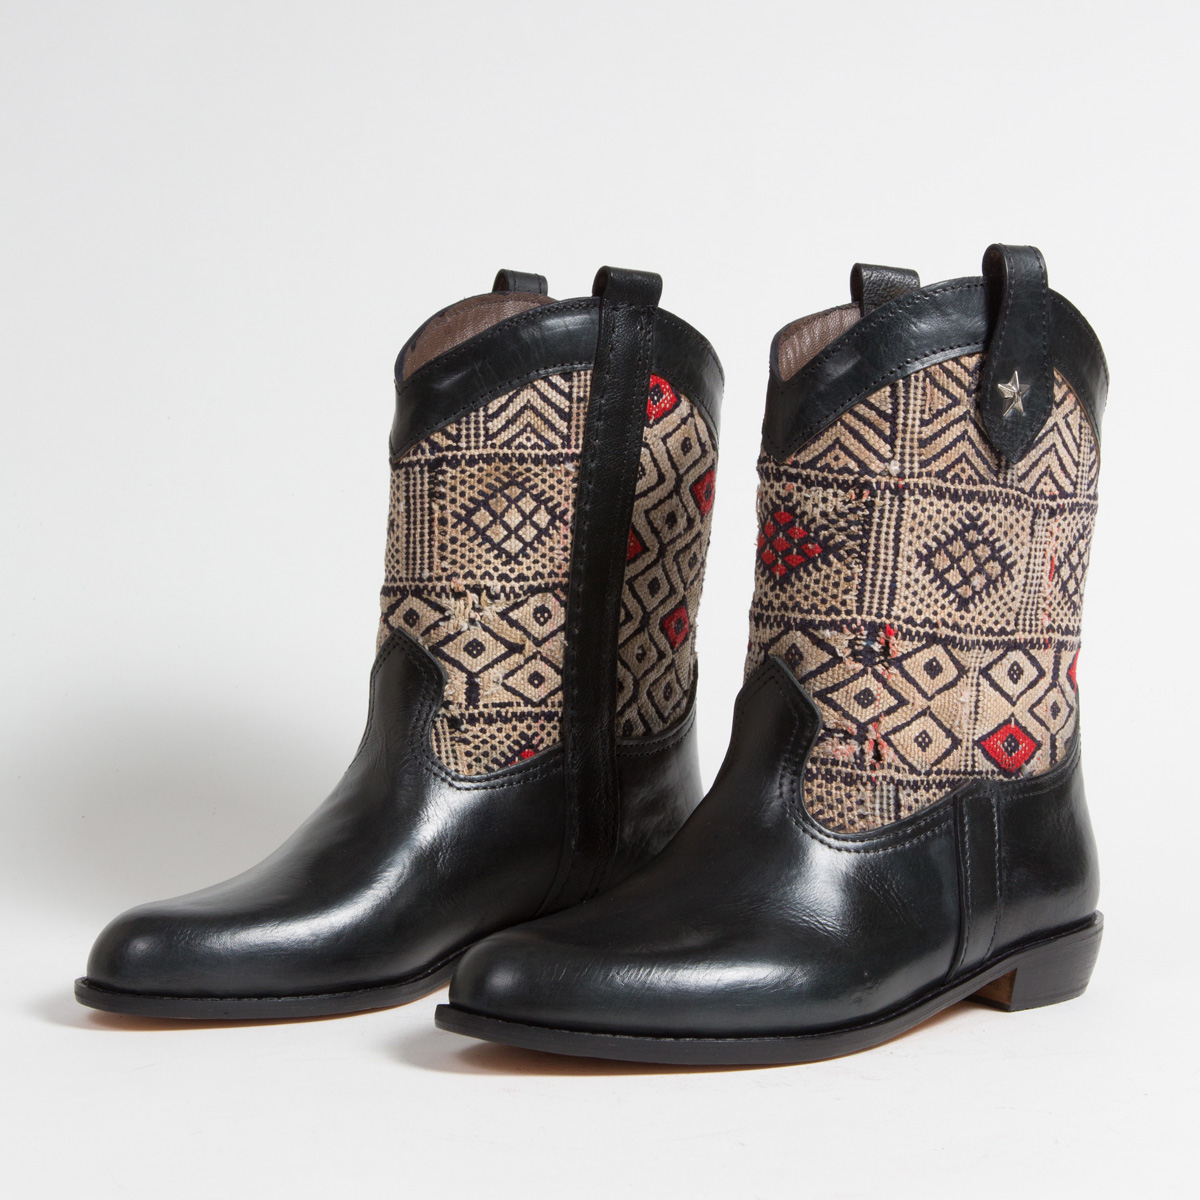 Bottines Kilim cuir mababouche artisanales (Réf. MN16-42)